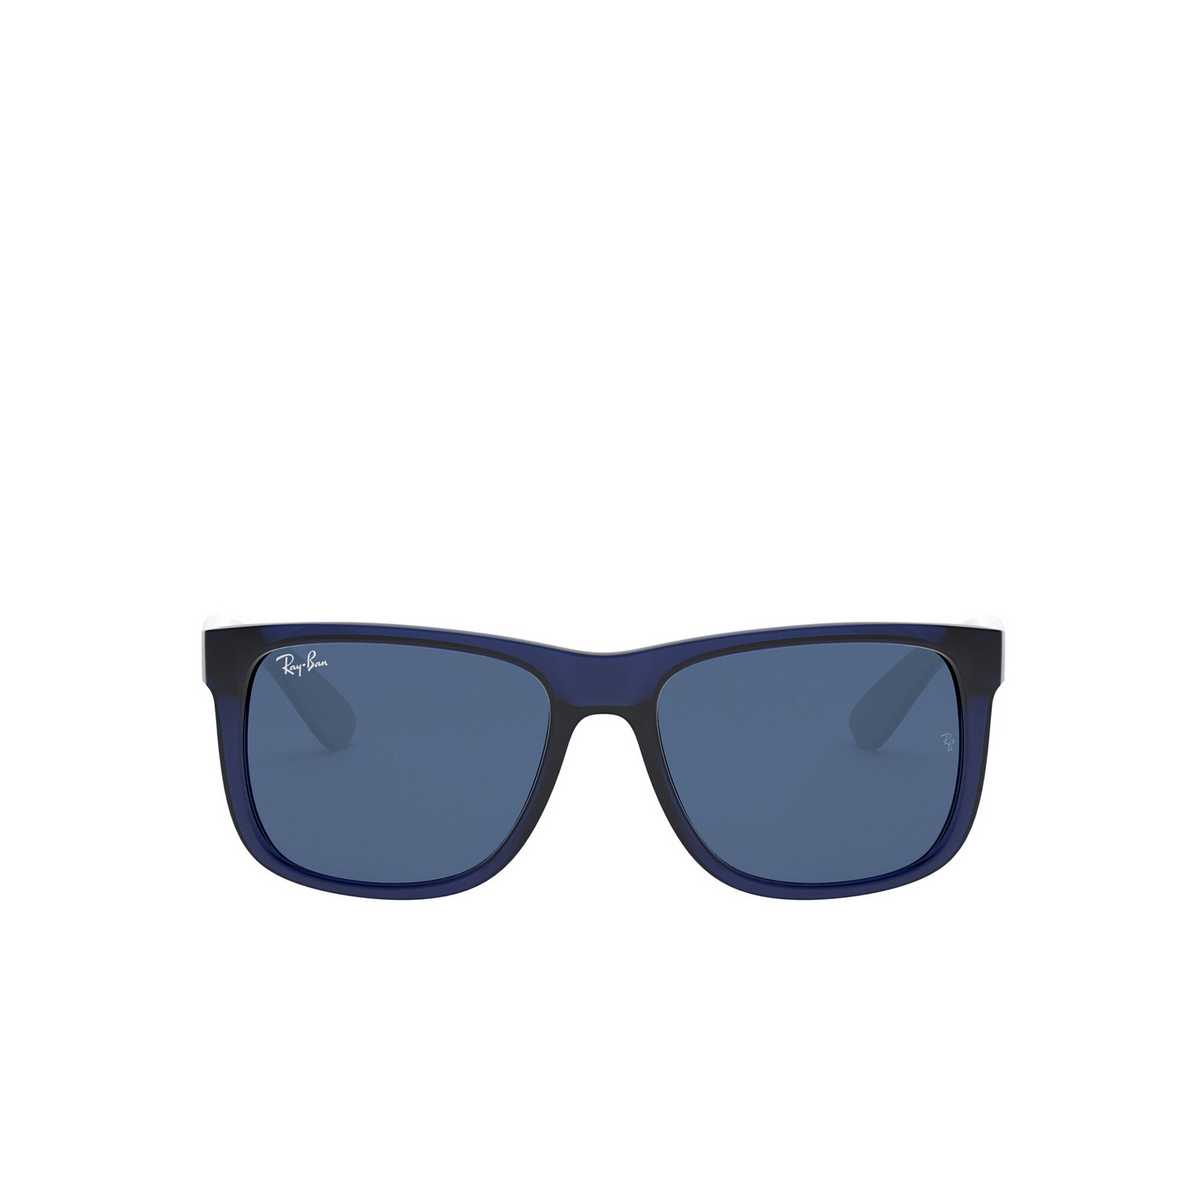 Ray-Ban JUSTIN Sunglasses 651180 Rubber Transparent Blue - front view